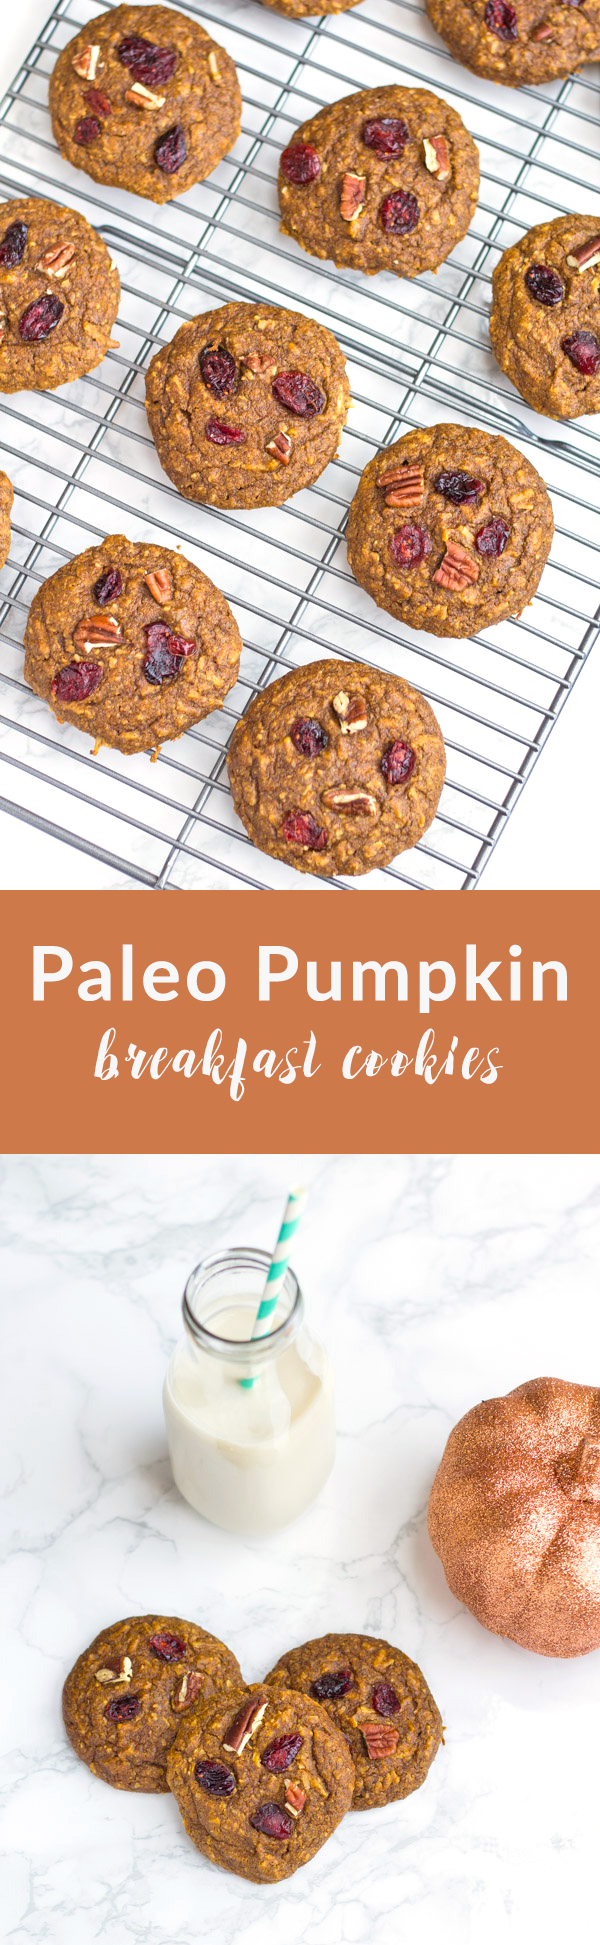 These Paleo Pumpkin Breakfast Cookies are the perfect way to start your day! Ready in 20 minutes with just one bowl.